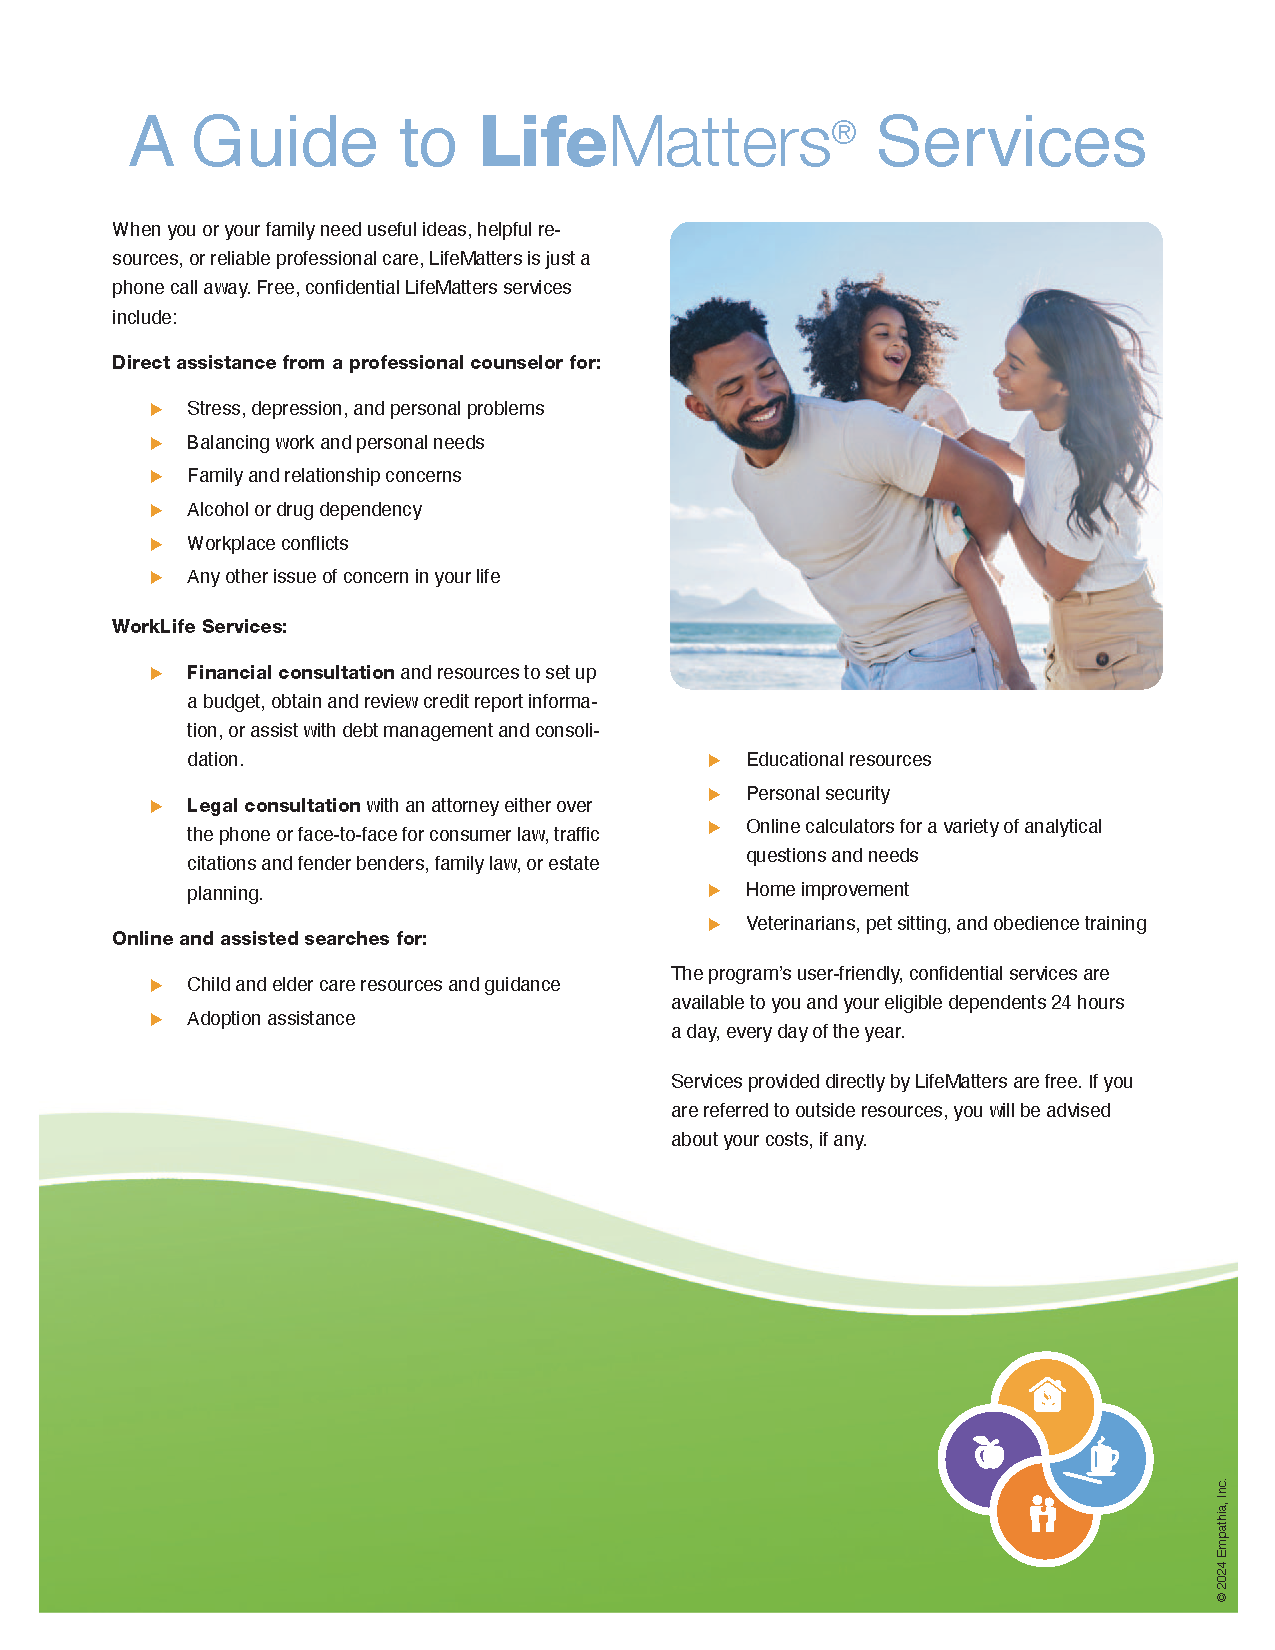 LifeMatters Services Guide